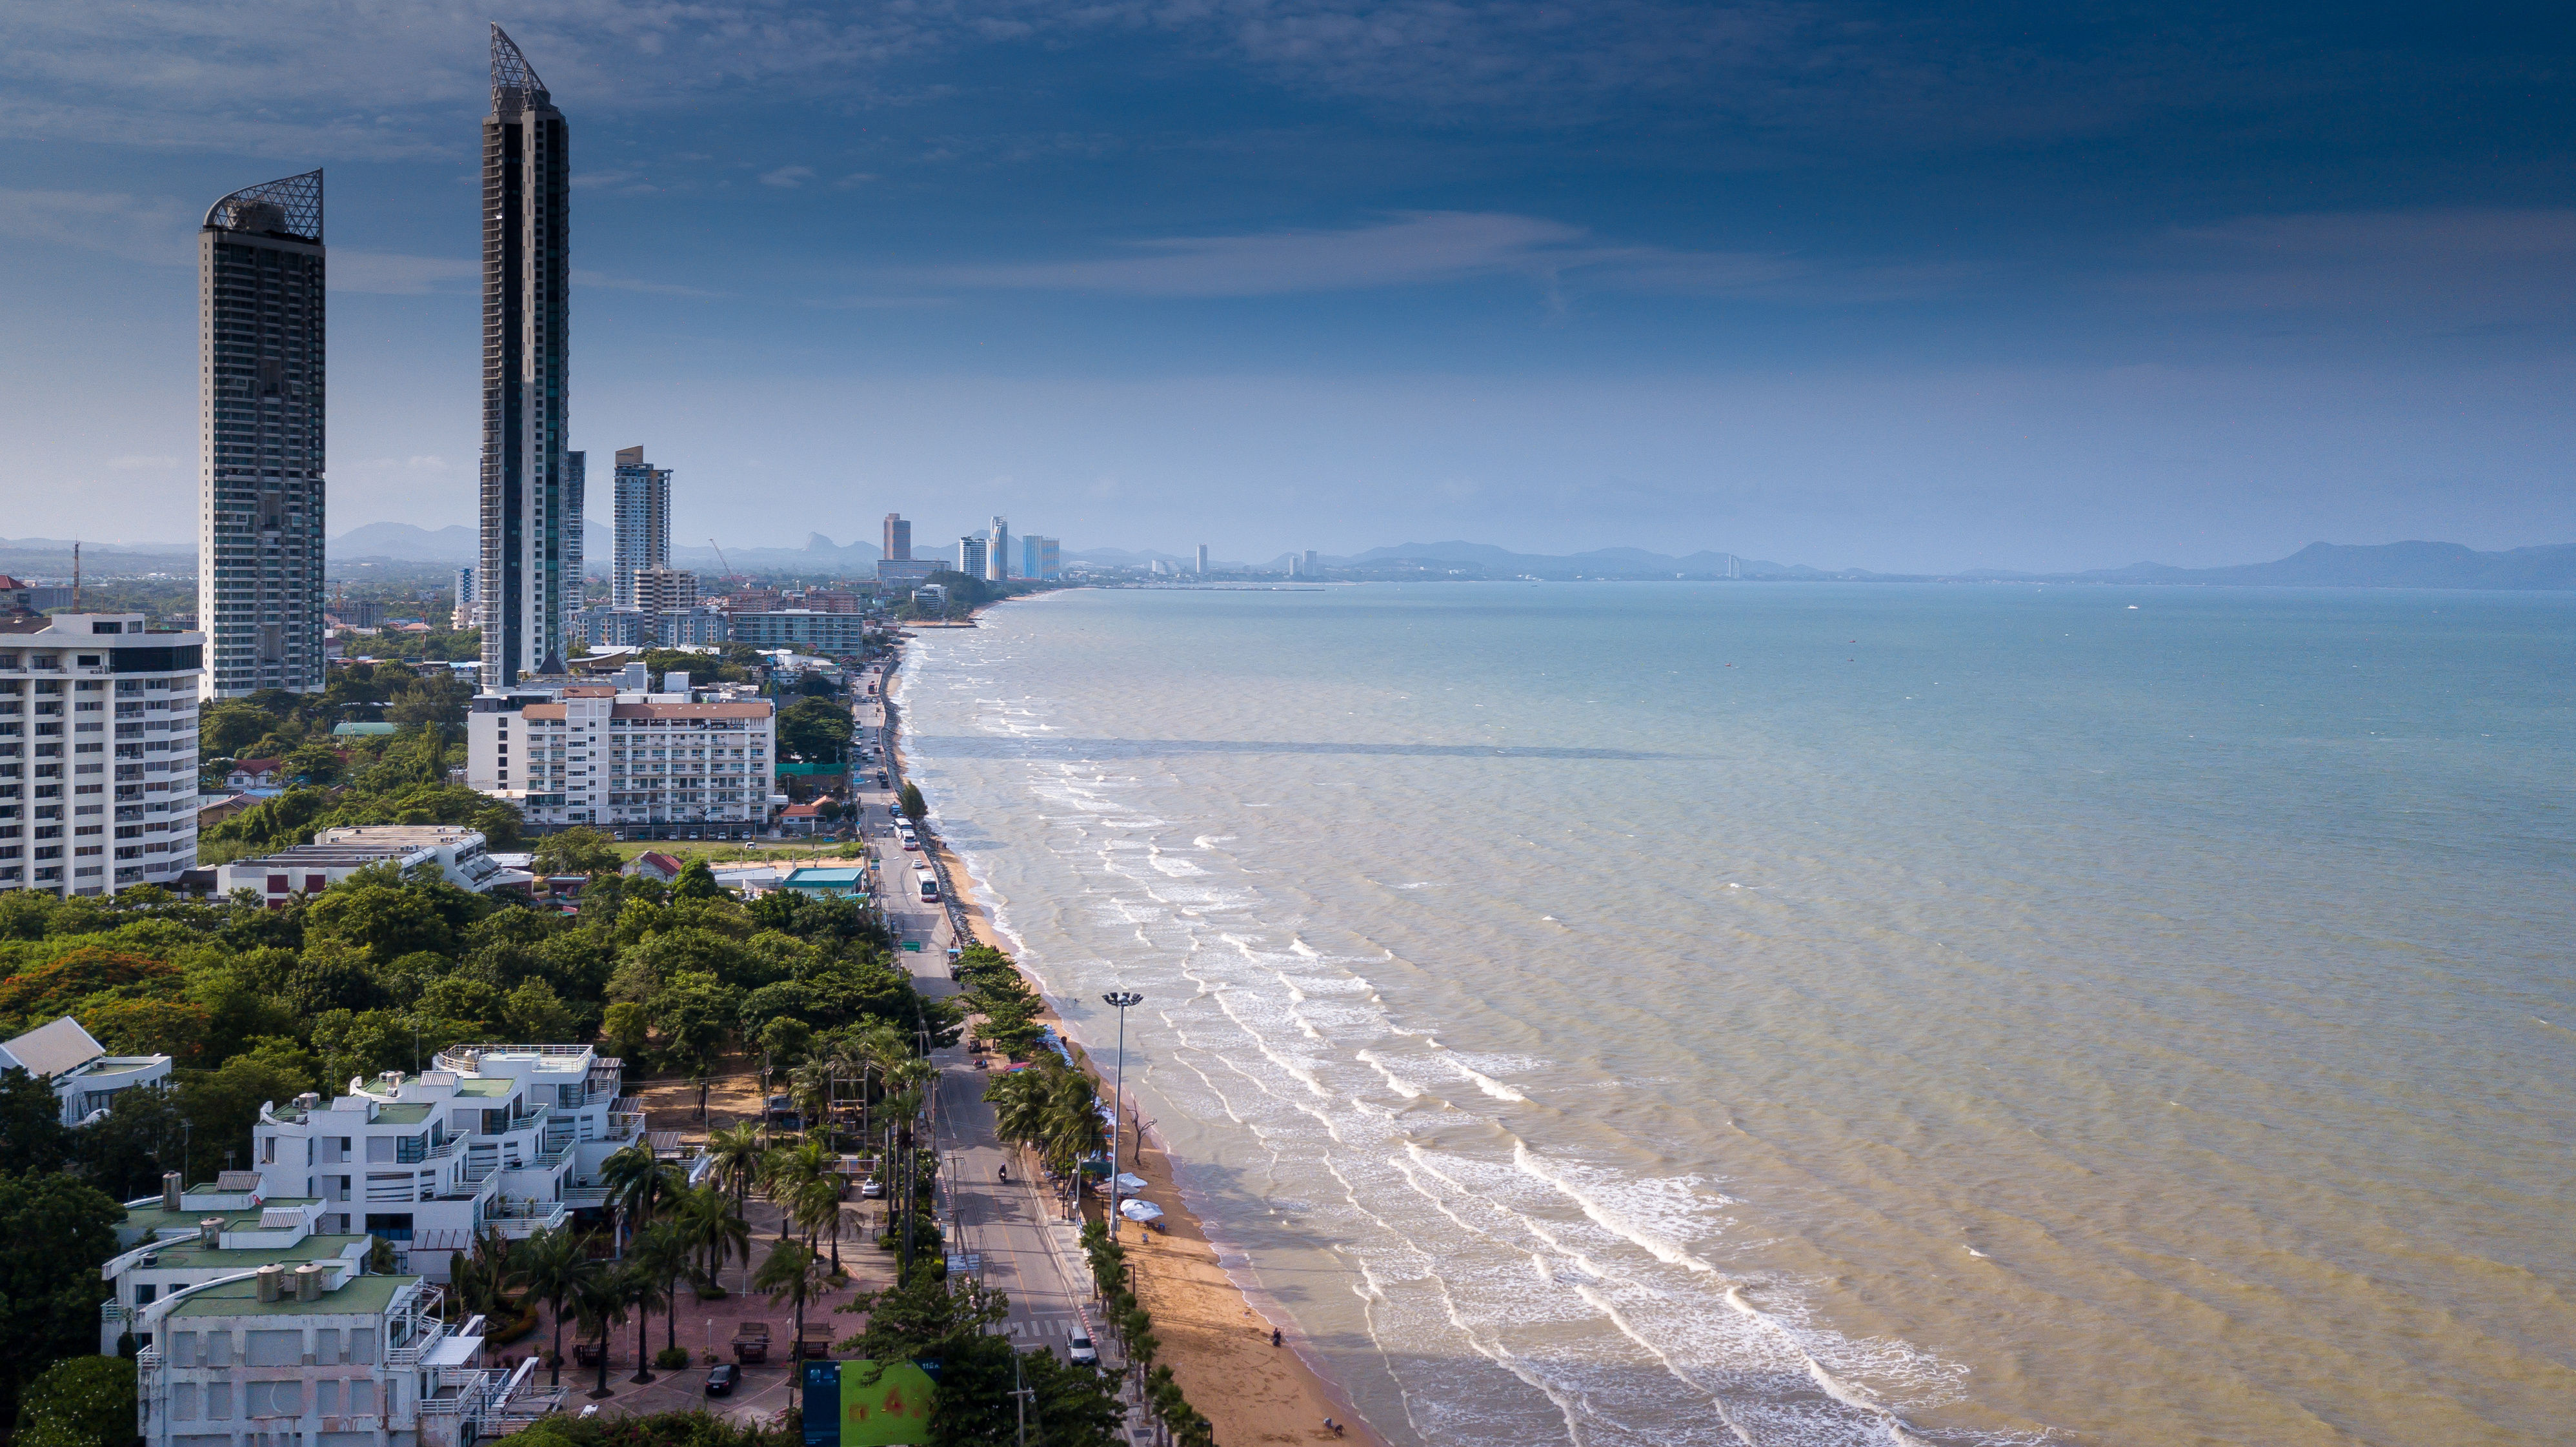 Aerial view of Jomtien Beach with high-rise hotels, golden sand beach and waves on shore. 